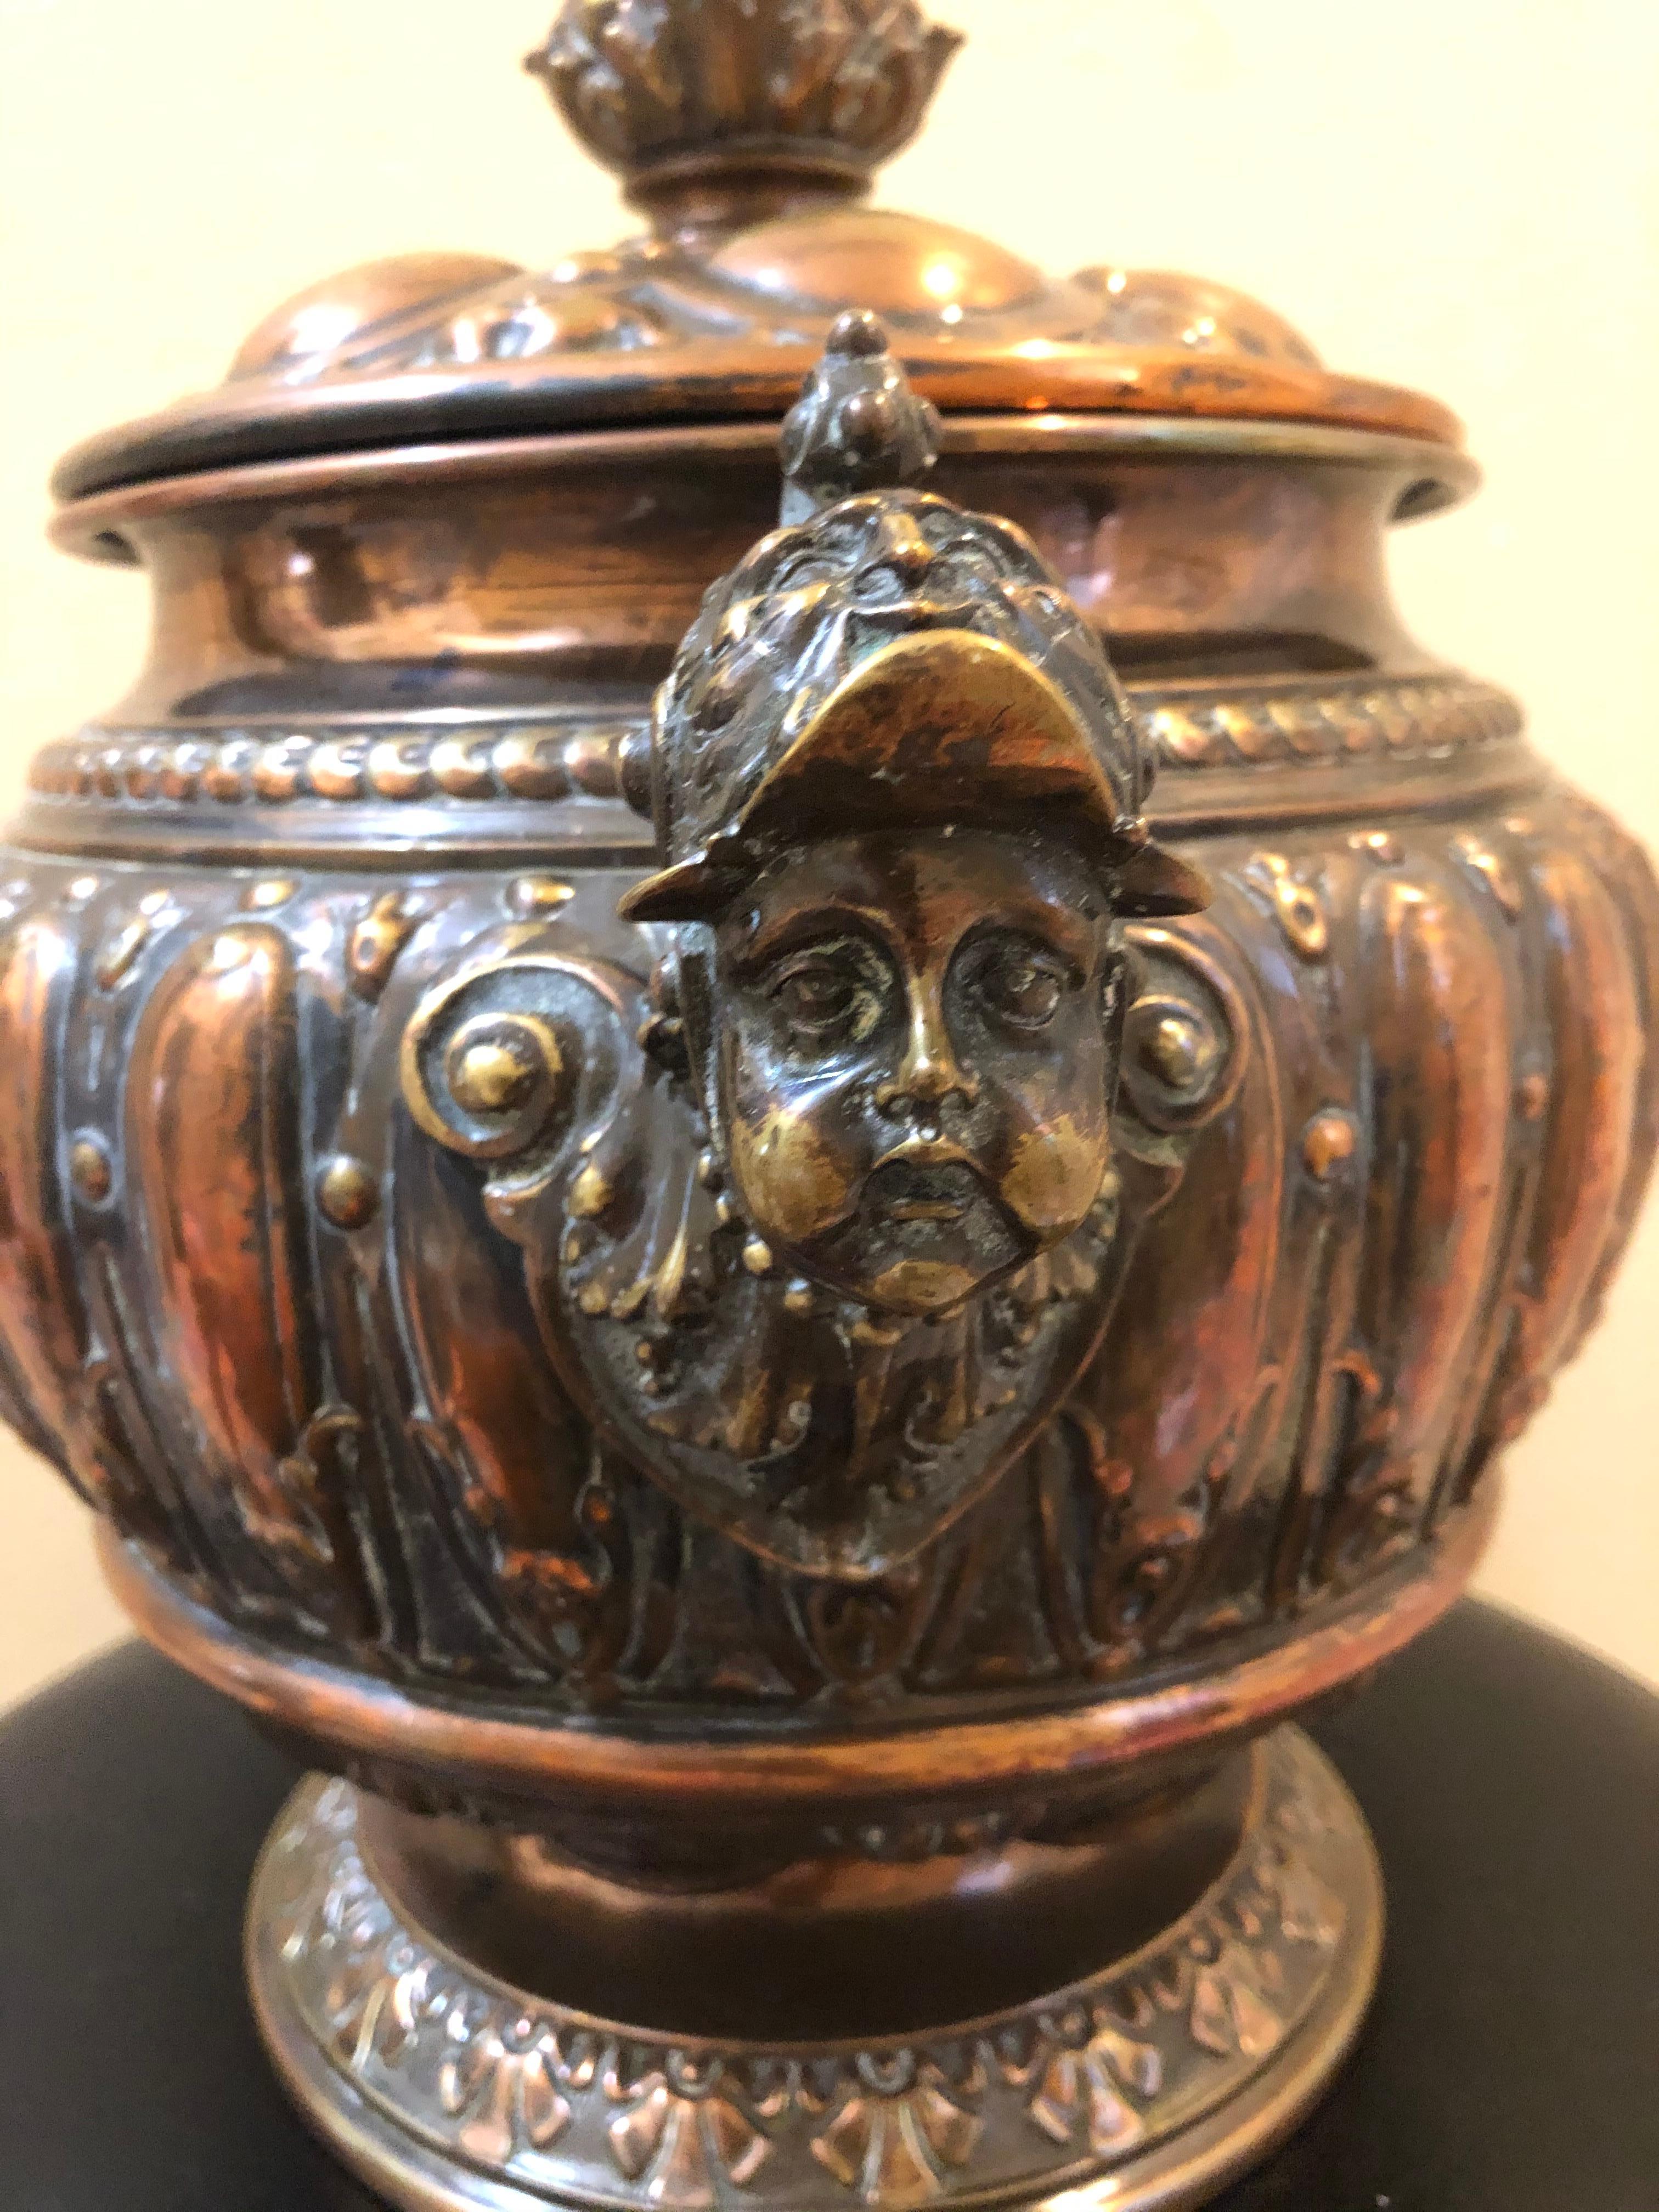 Repoussé European 18th or Early 19th Century Repousse Copper Tureen